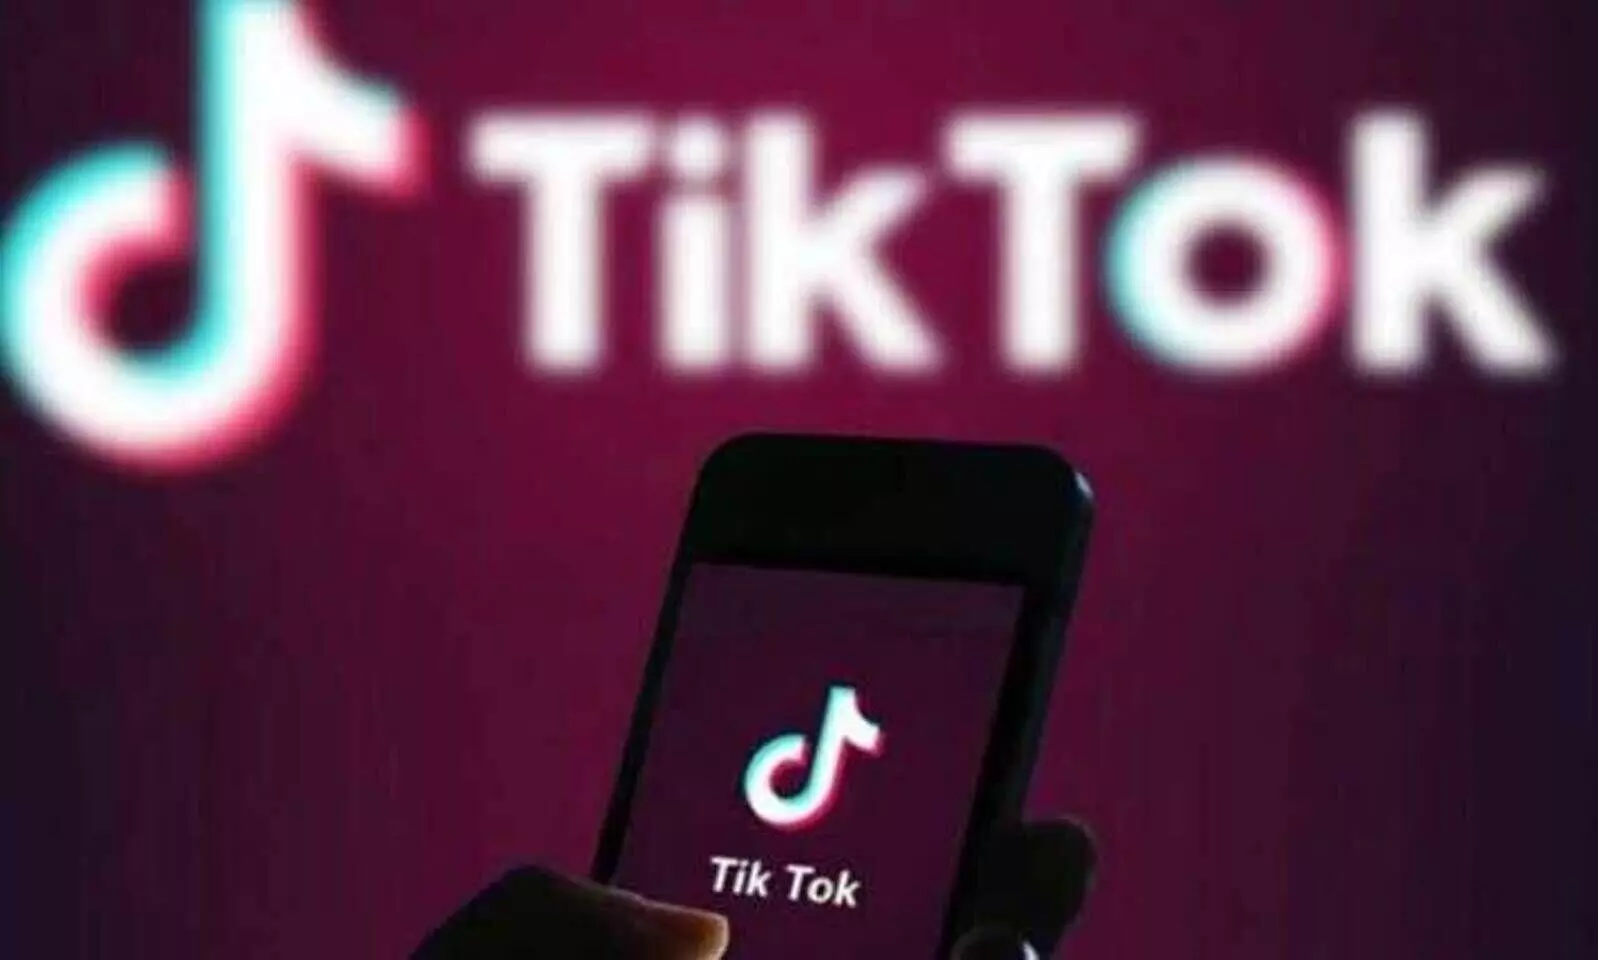 TikTok worlds most downloaded non-gaming app in August: Report